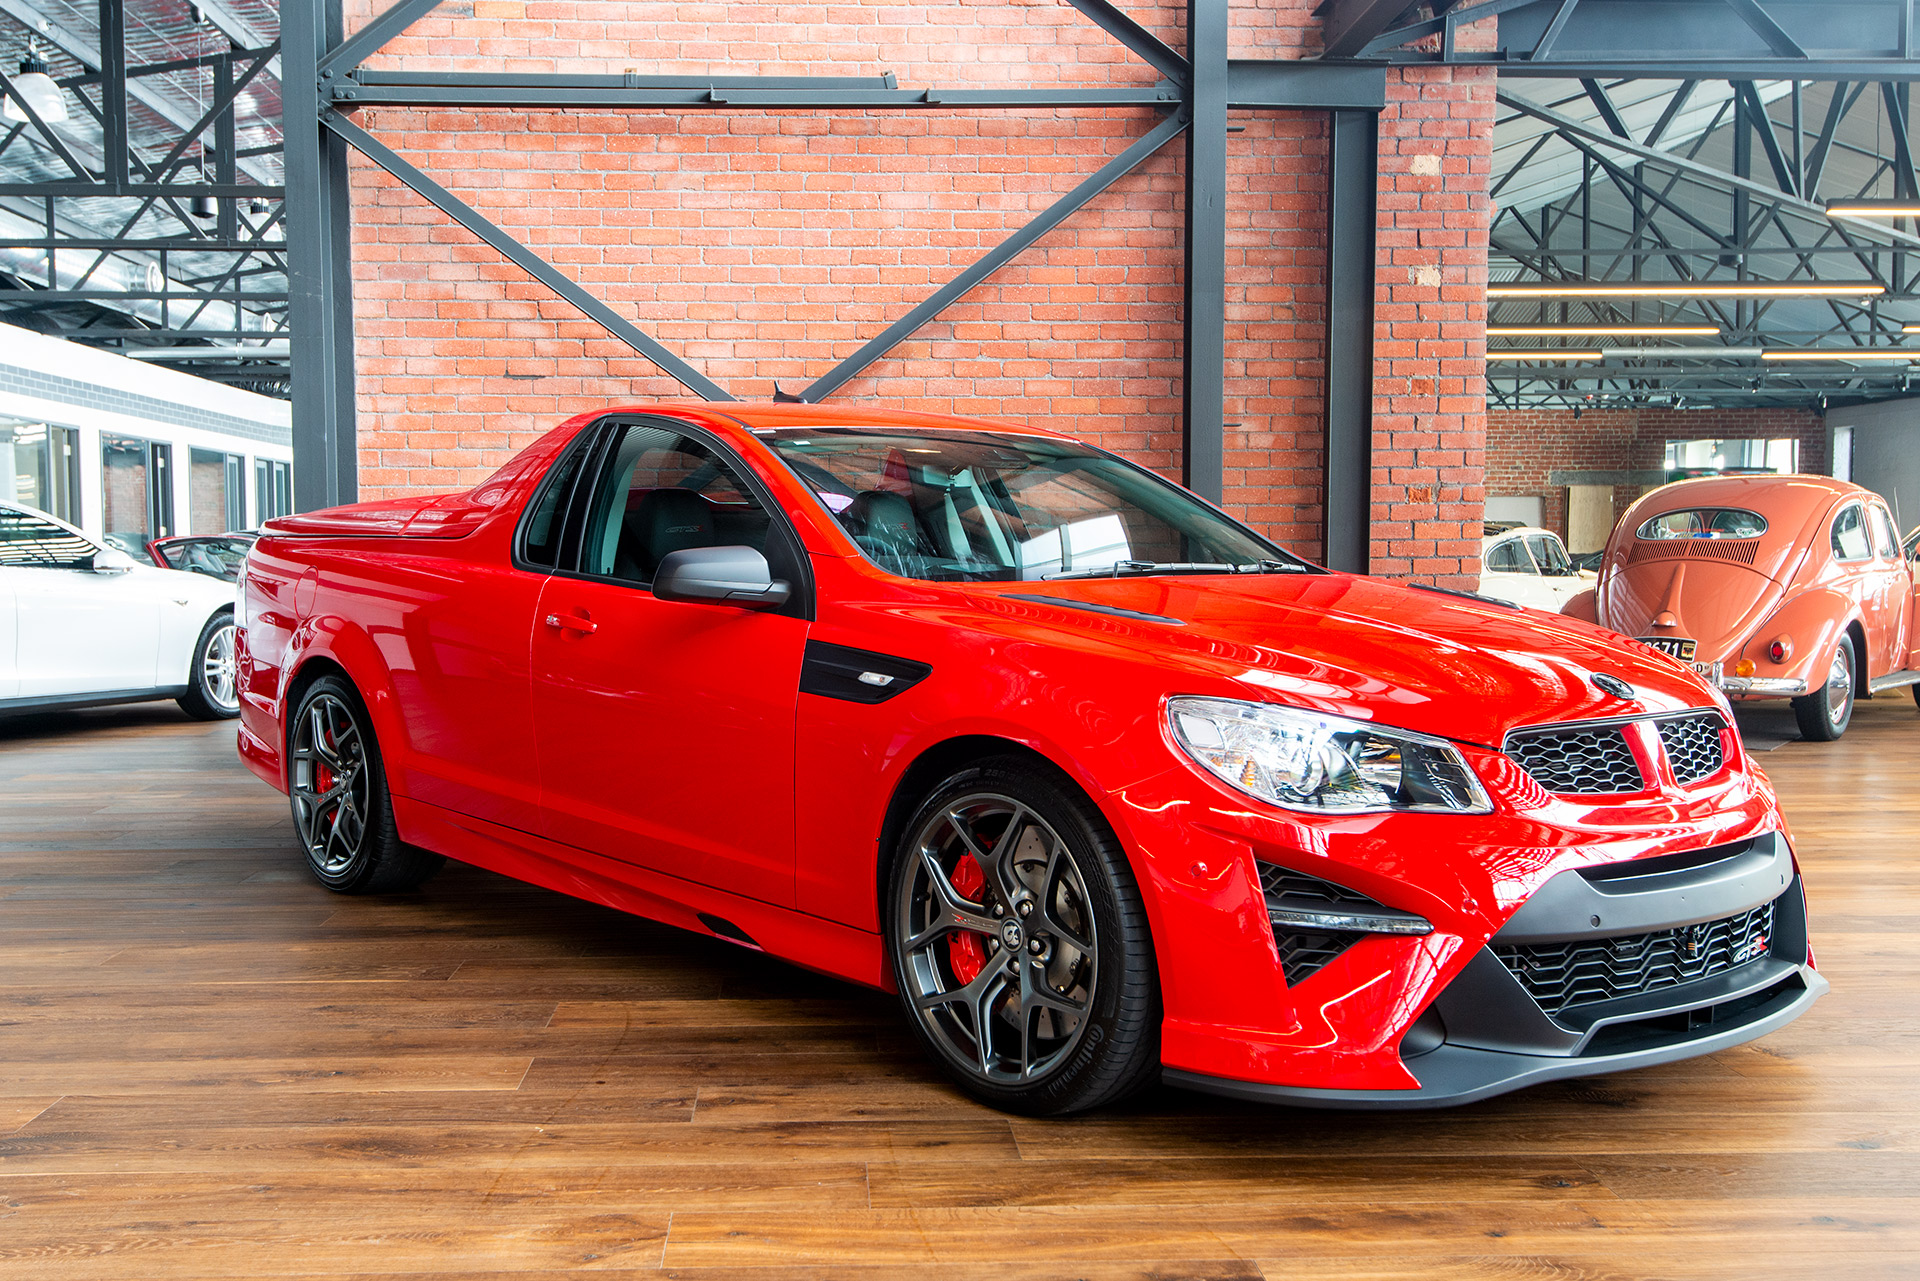 Hsv Maloo Used 2016 Holden 2016 Holden Hsv Maloo R8 Lsa Utility Utes